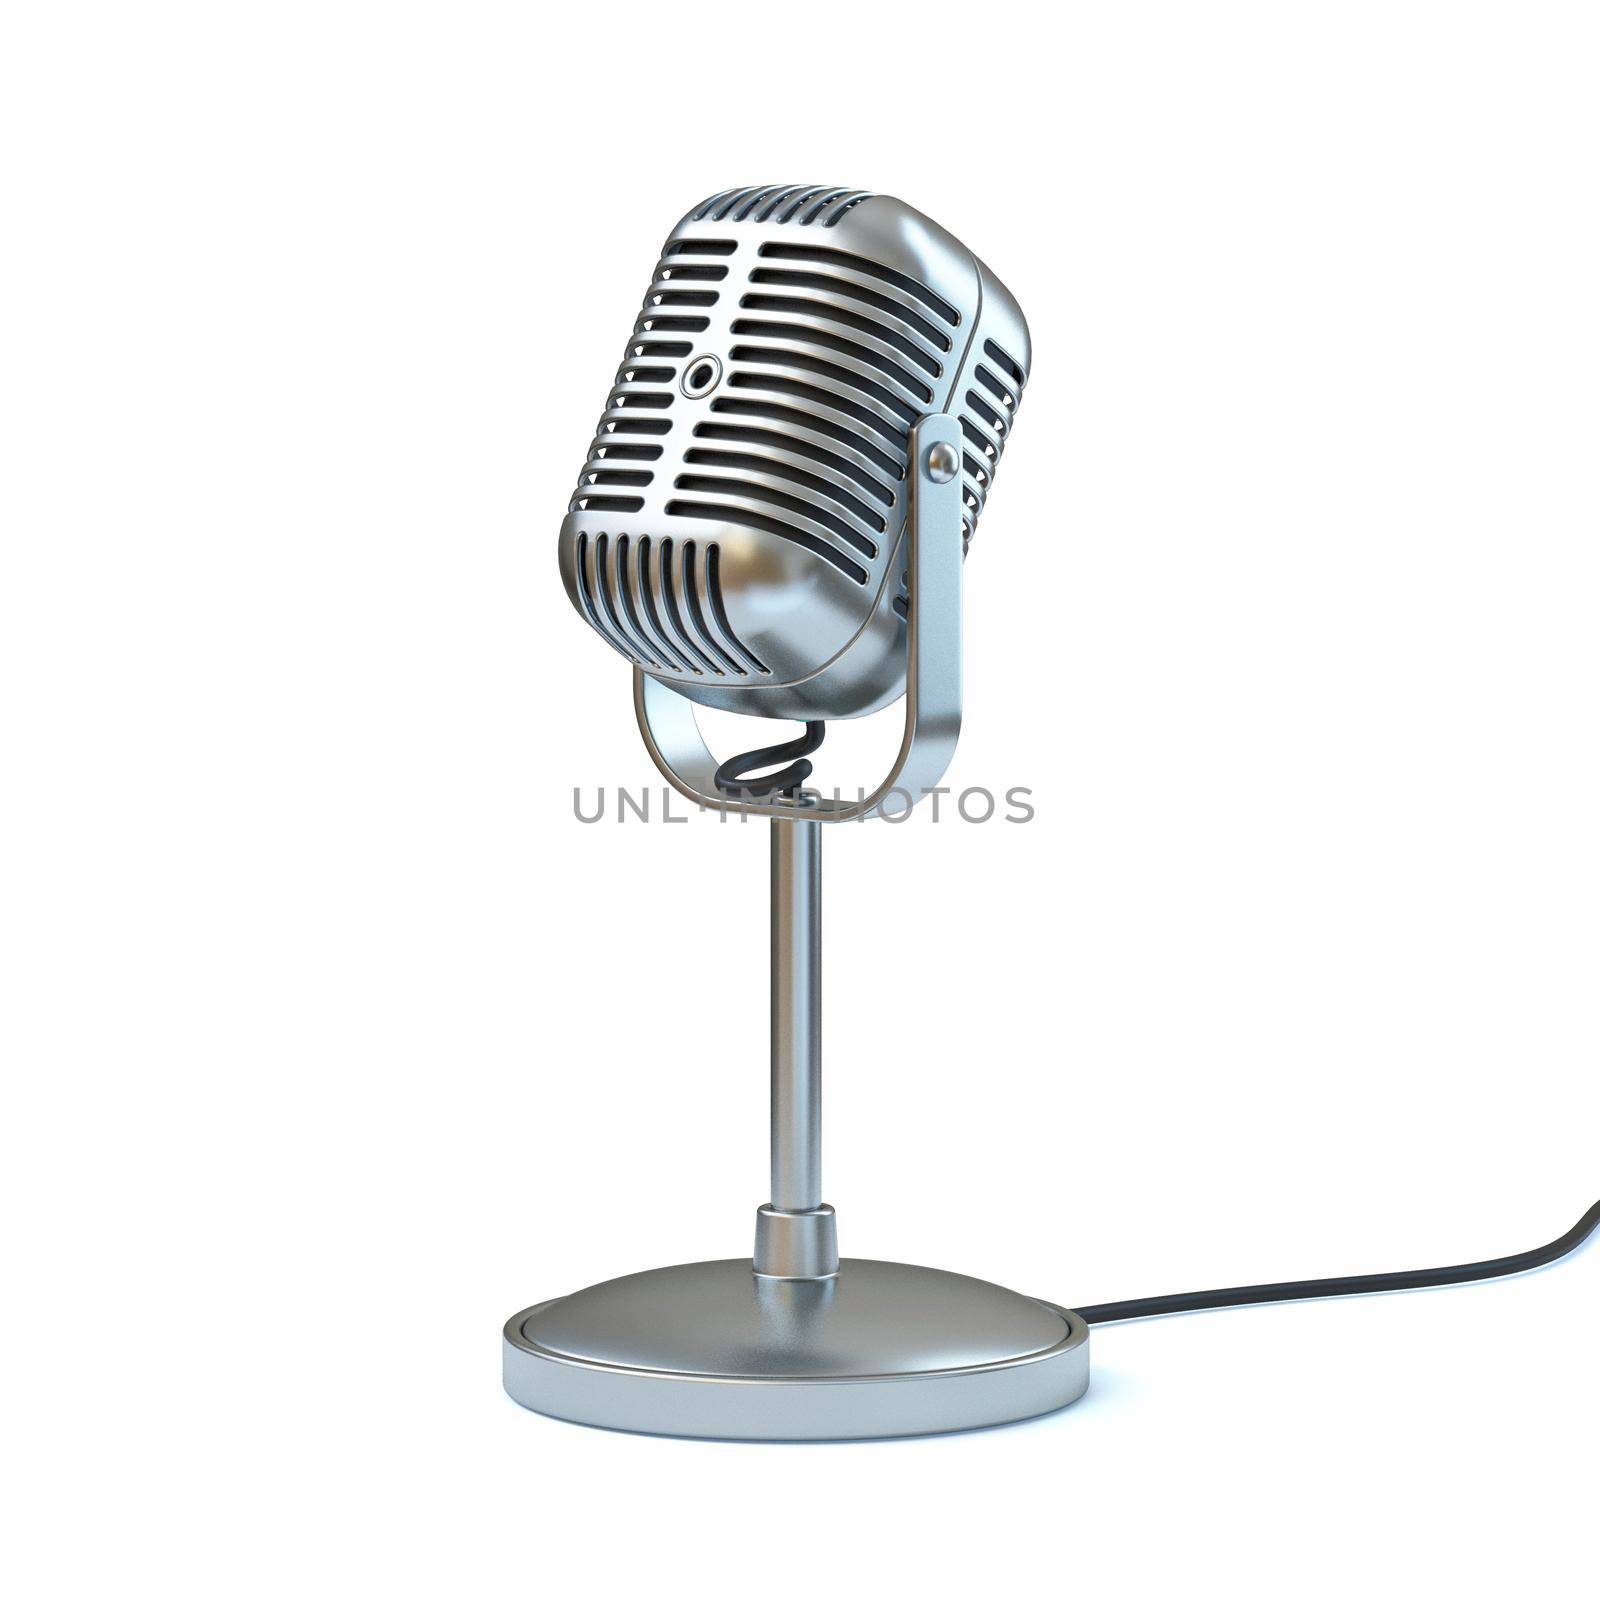 Vintage microphone 3D rendering illustration isolated on white background